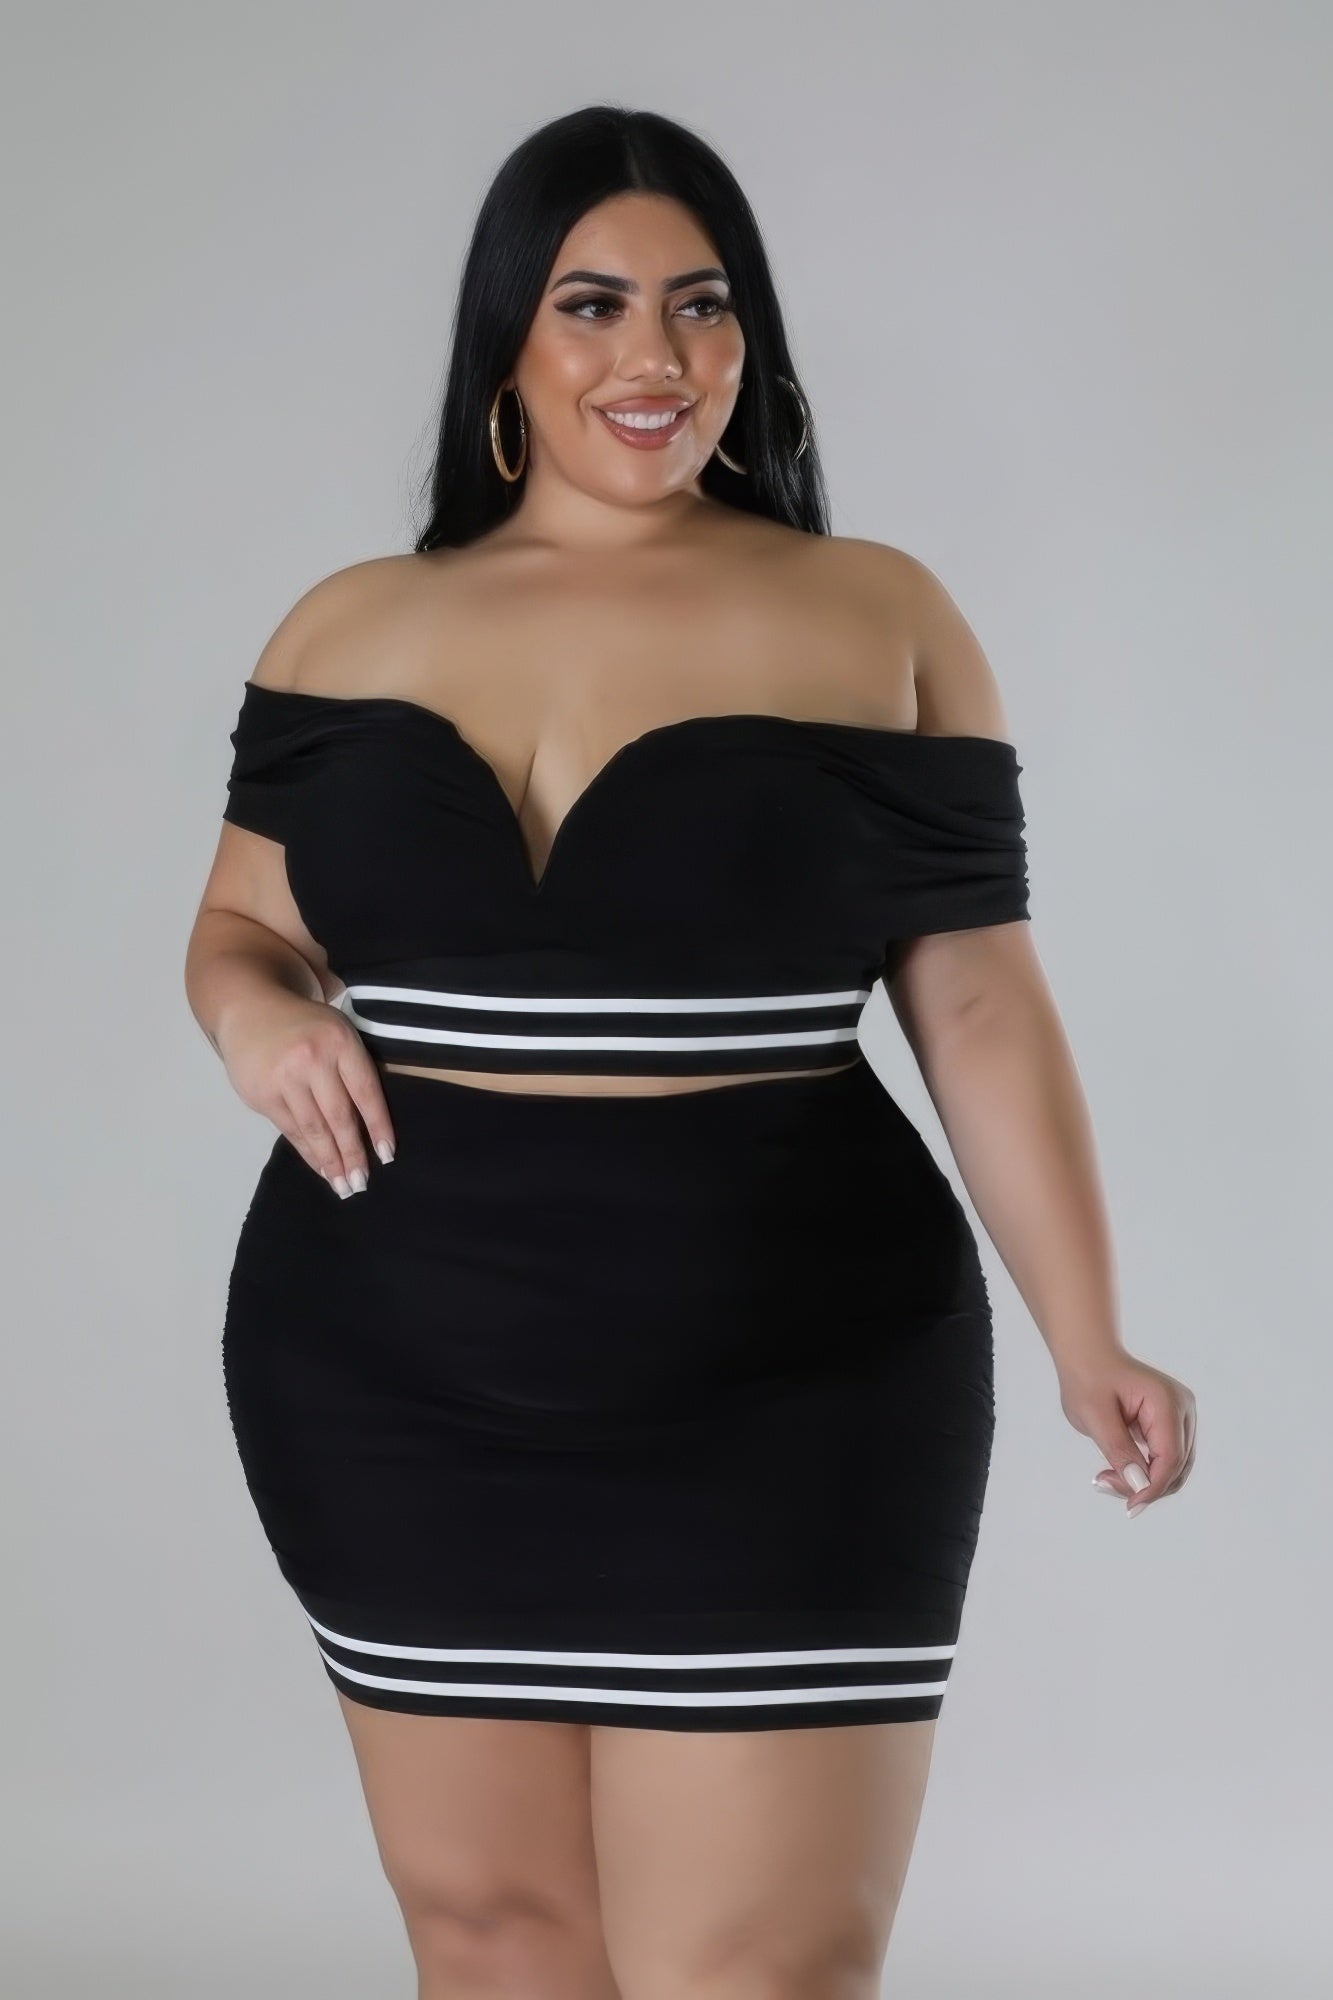 Stretch Skirt Set | Black, CCPRODUCTS, NEW ARRIVALS, PLUS SIZE, PLUS SIZE SETS, RESTOCKED POPULAR ITEMS | Style Your Curves